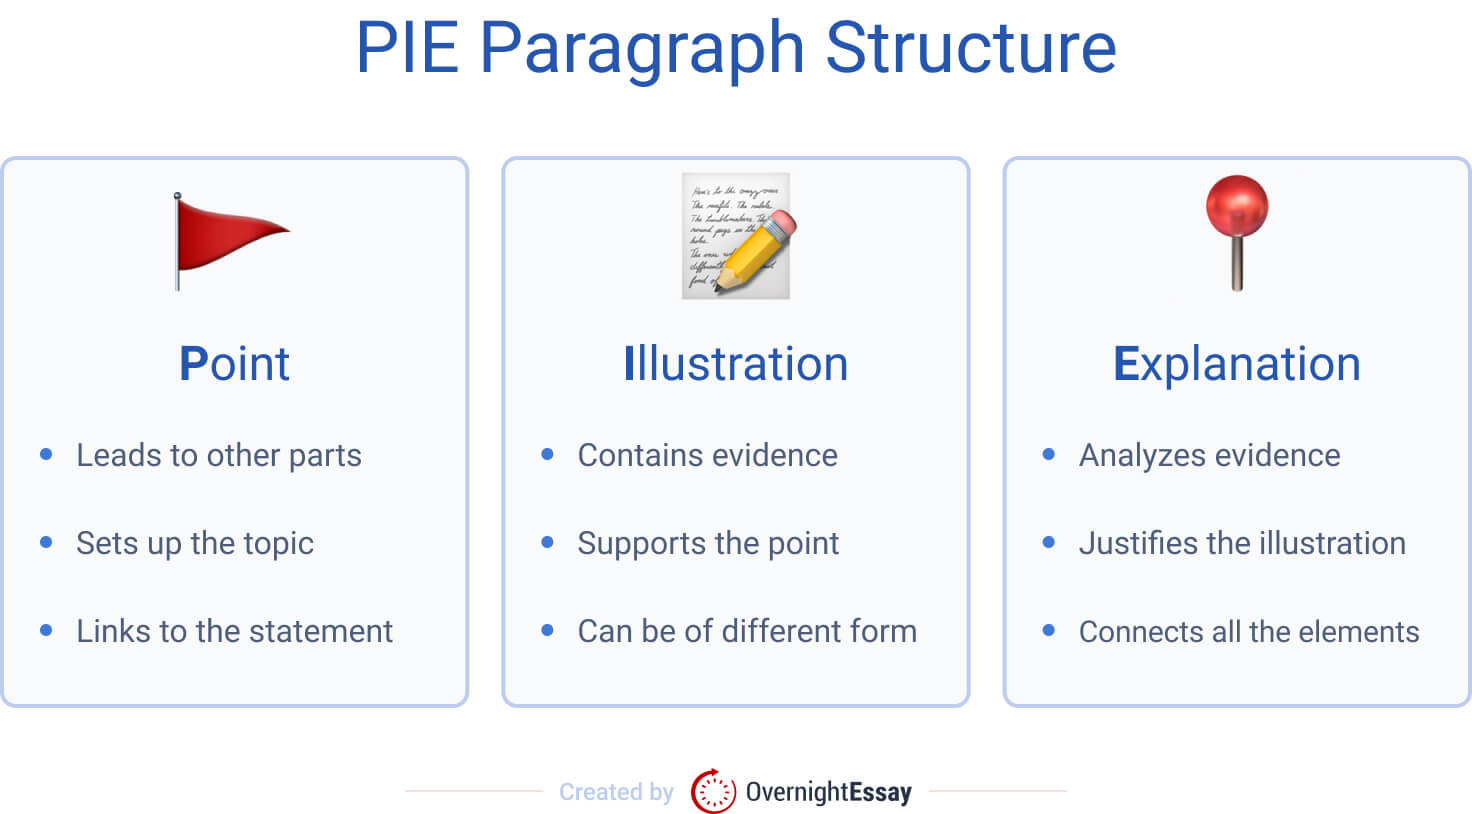 The picture introduces the PIE method of paragraph building.